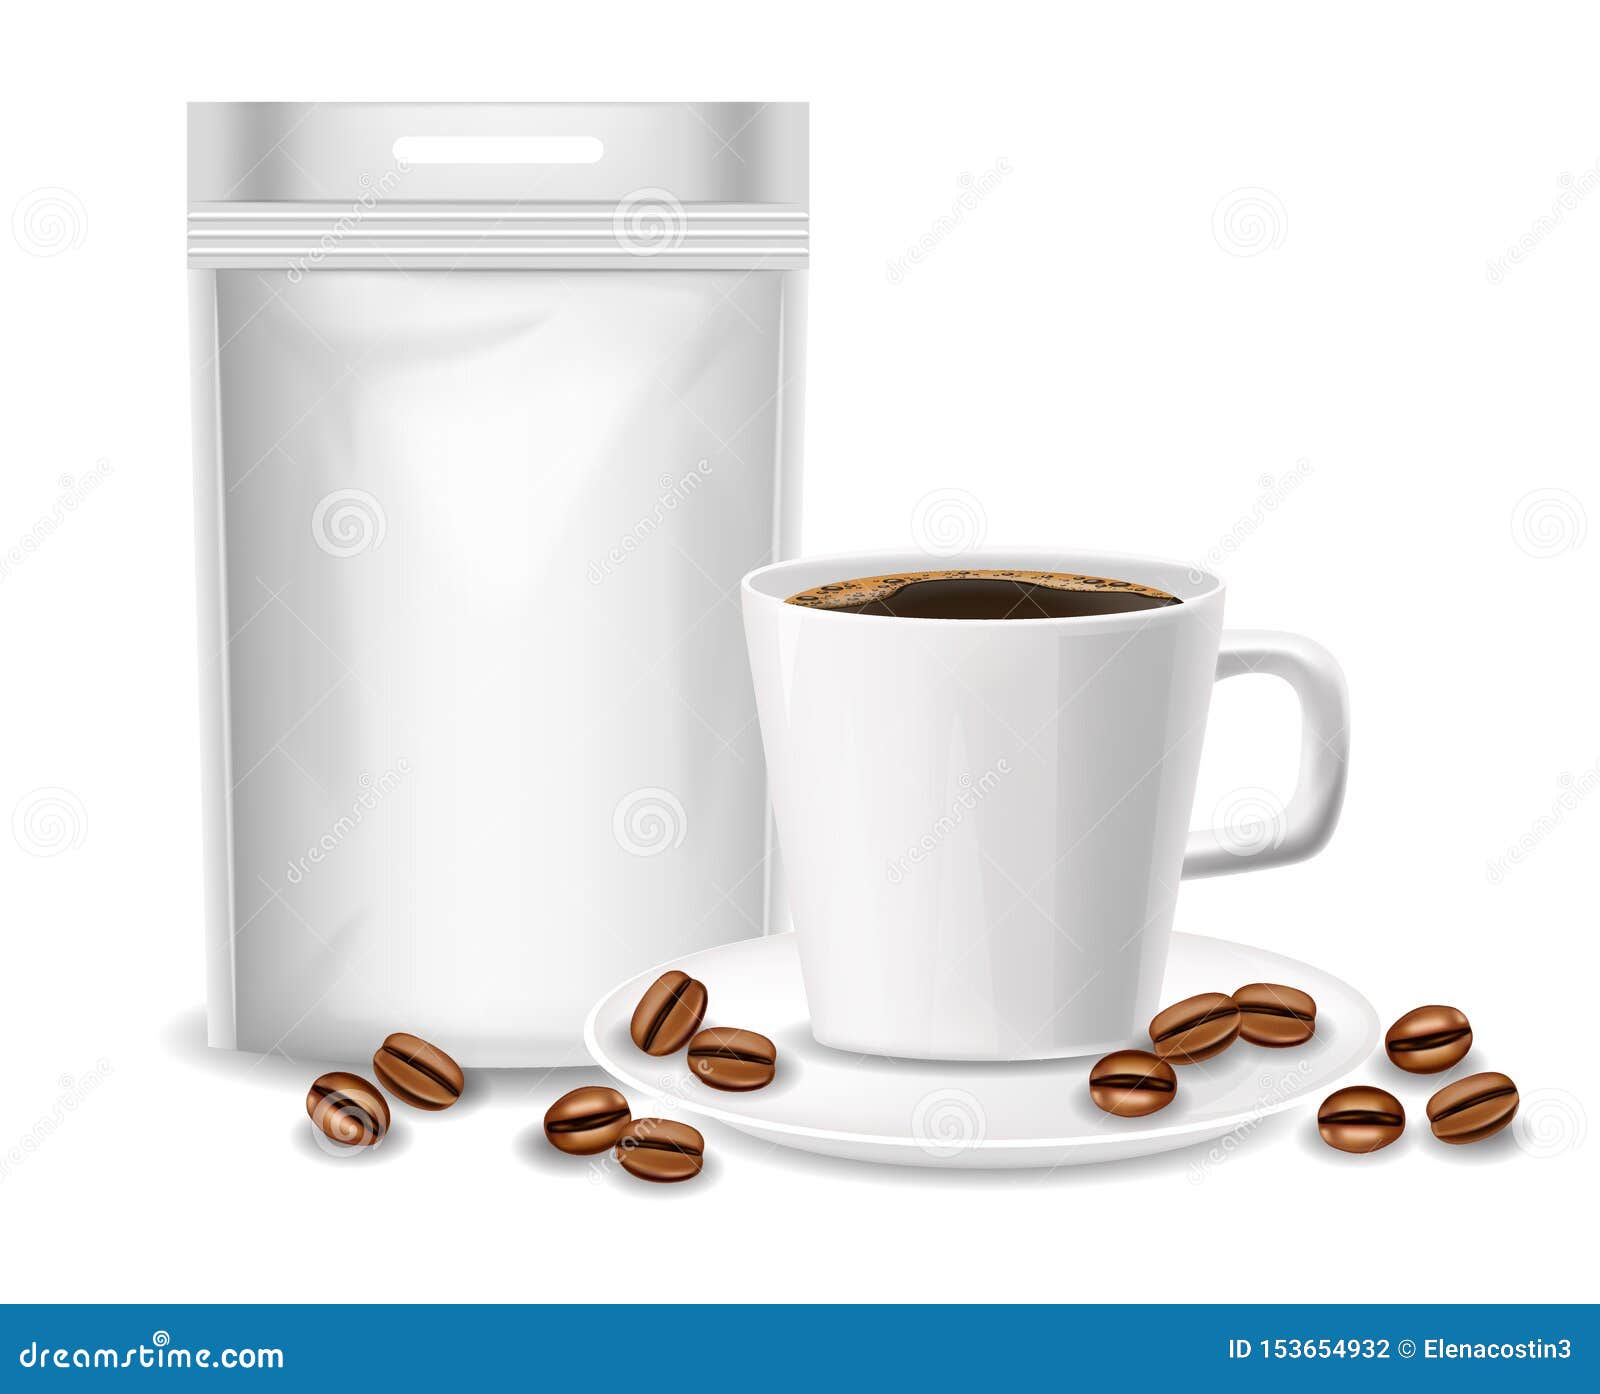 Download White Flexible Bag For Coffee Realistic, Packaging Mockup ...